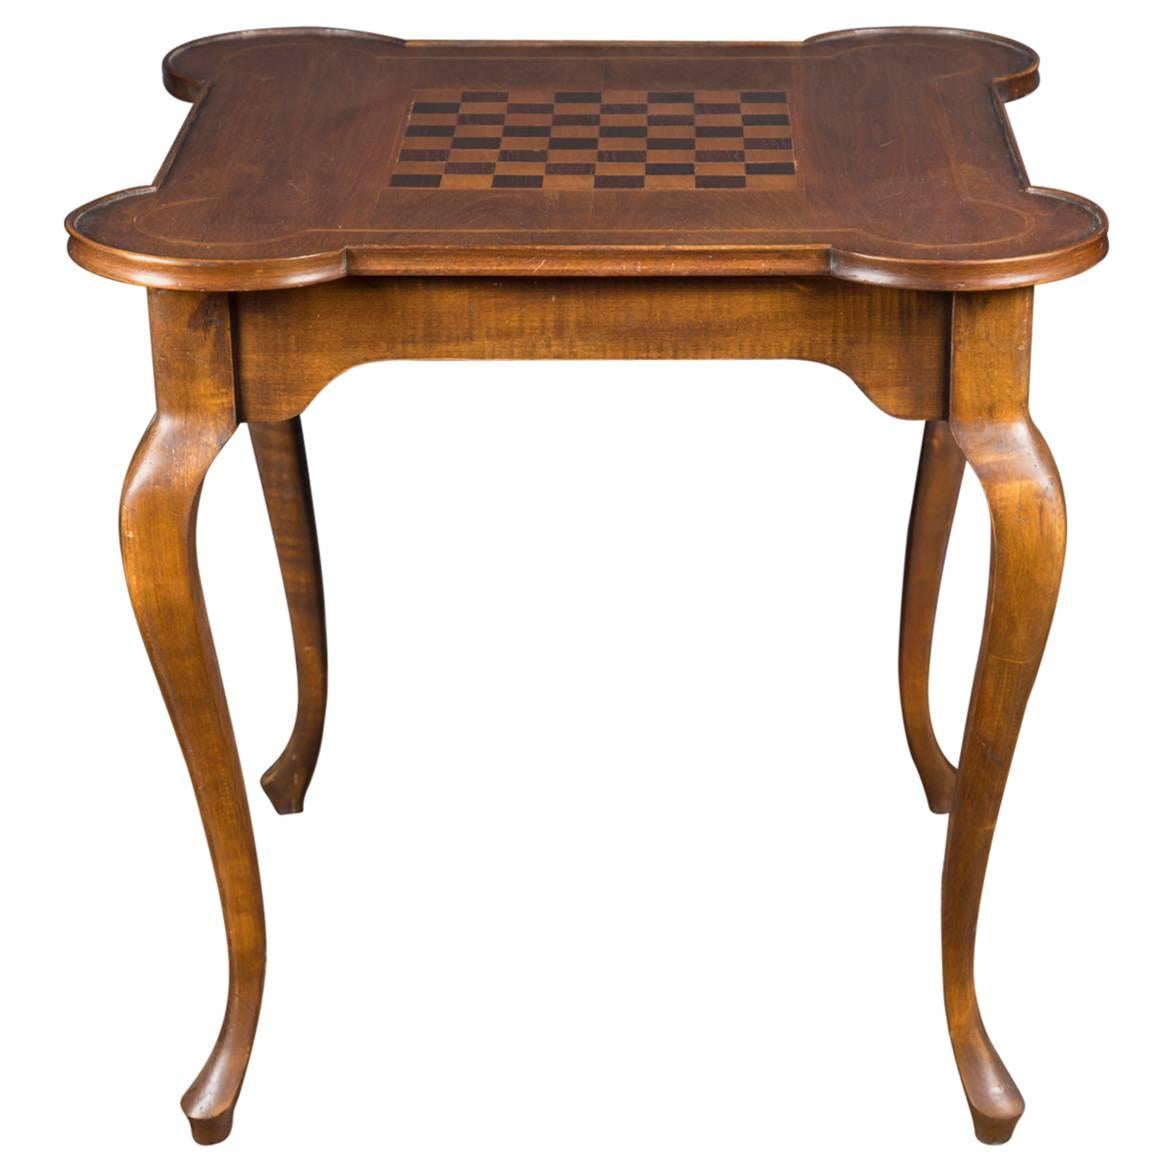 Italian 20th Century Game Table with Inlaid Chess/Checkerboard and Cabriole Legs